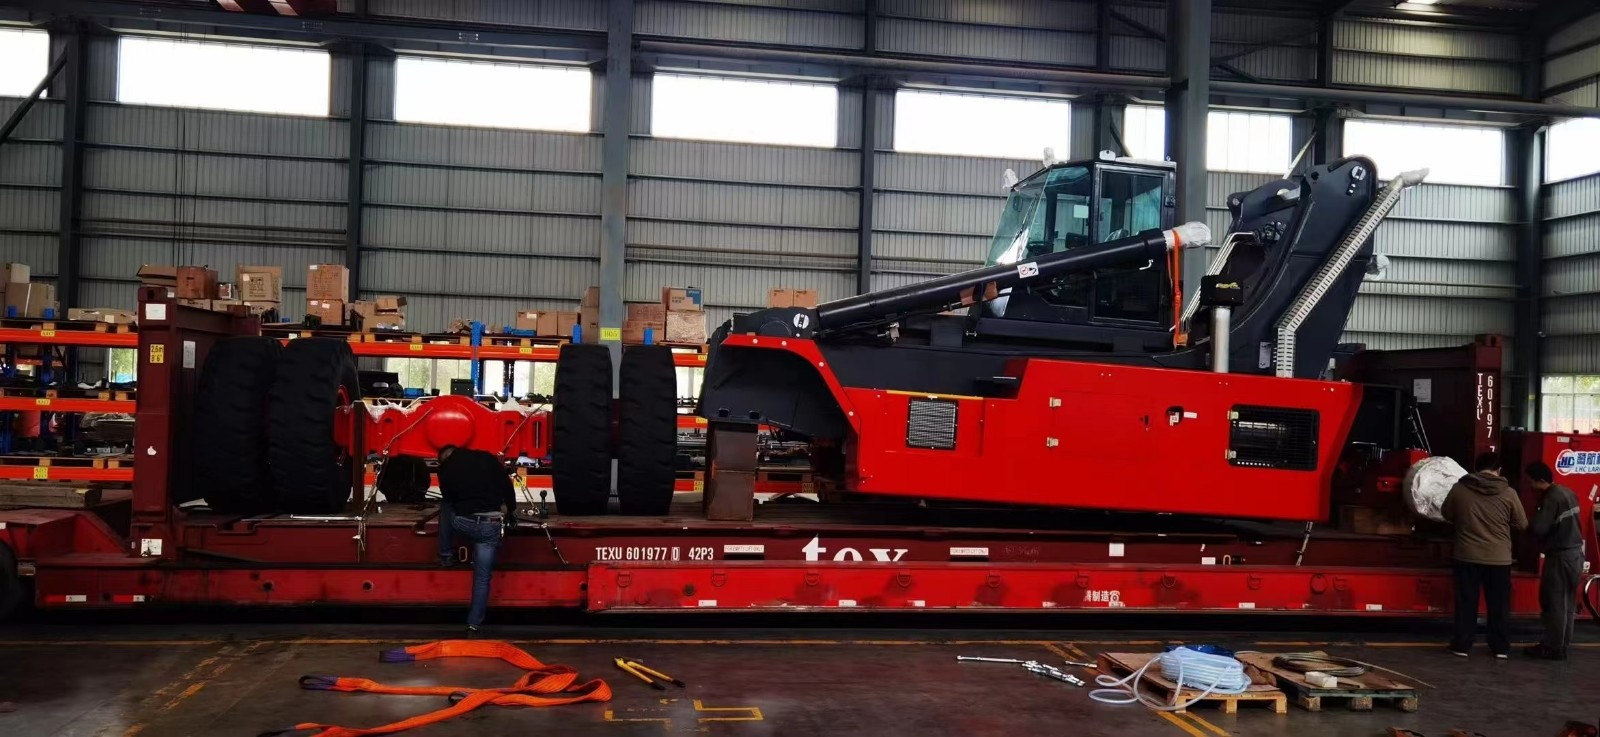 vicgordan 45ton reachstacker 45 ton reachstacker are going to customer from Africa for their container yard